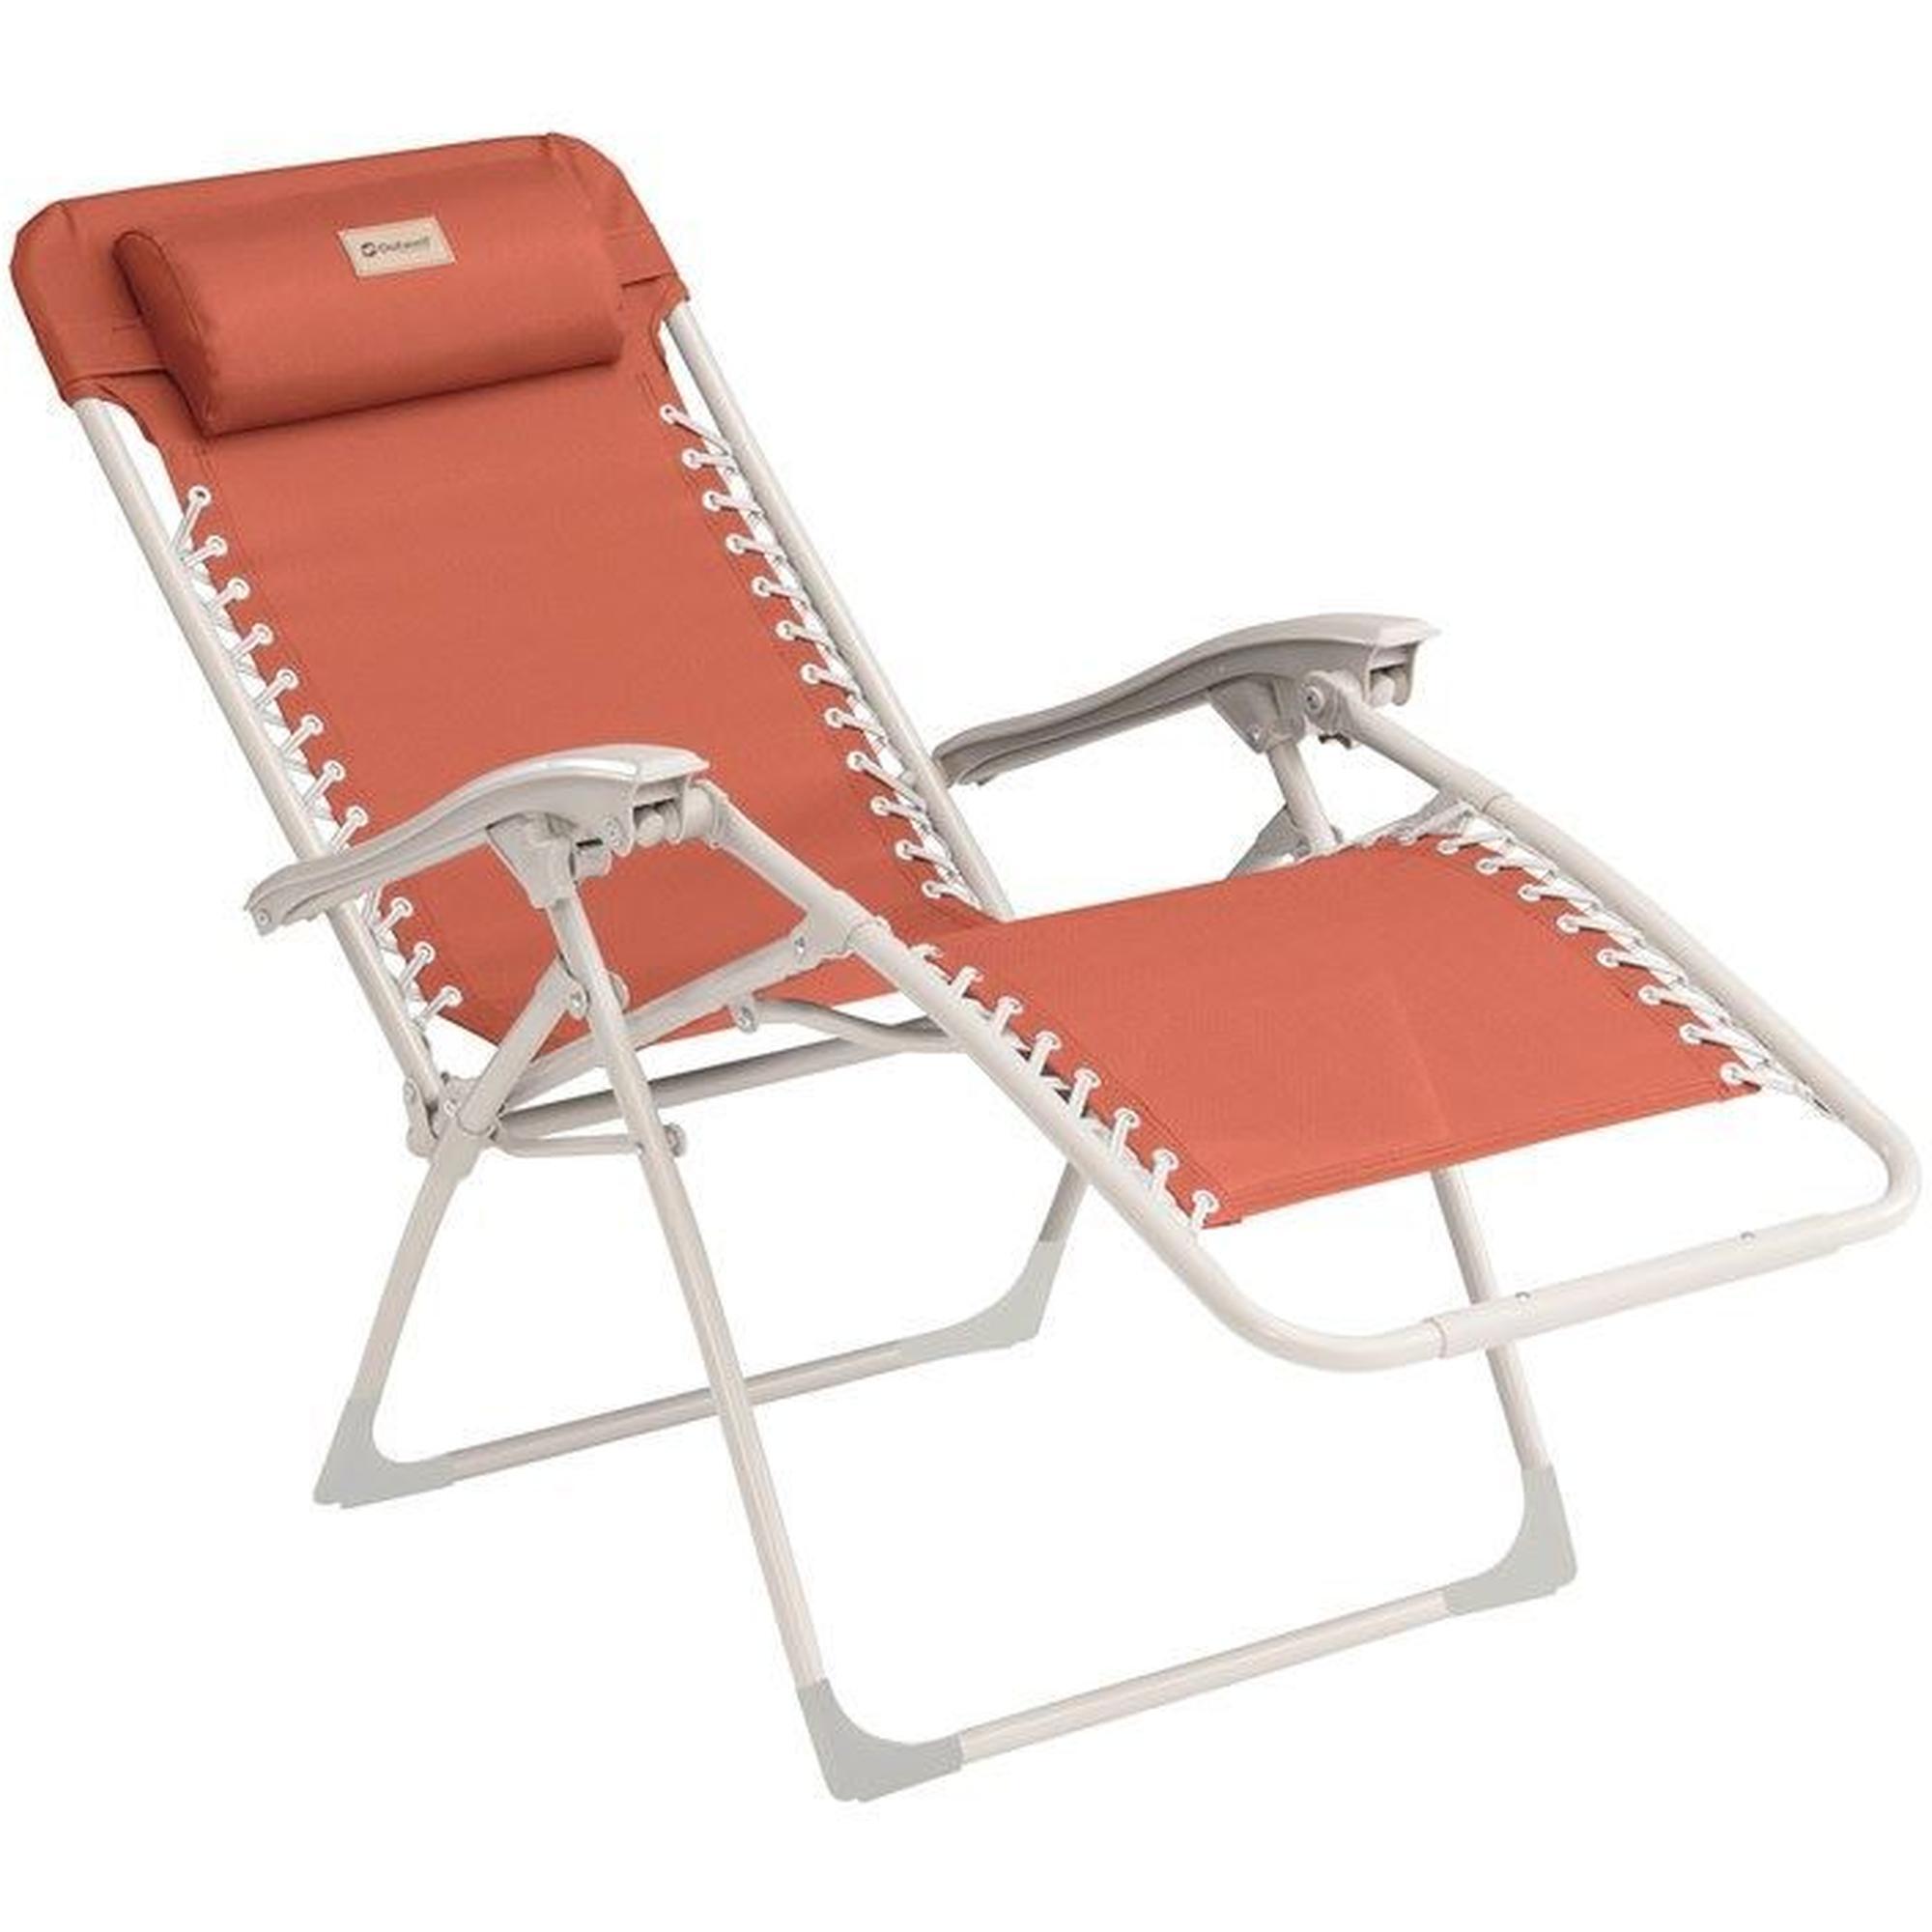 OUTWELL Outwell Ramsgate Folding Relaxer Lounger - Warm Red